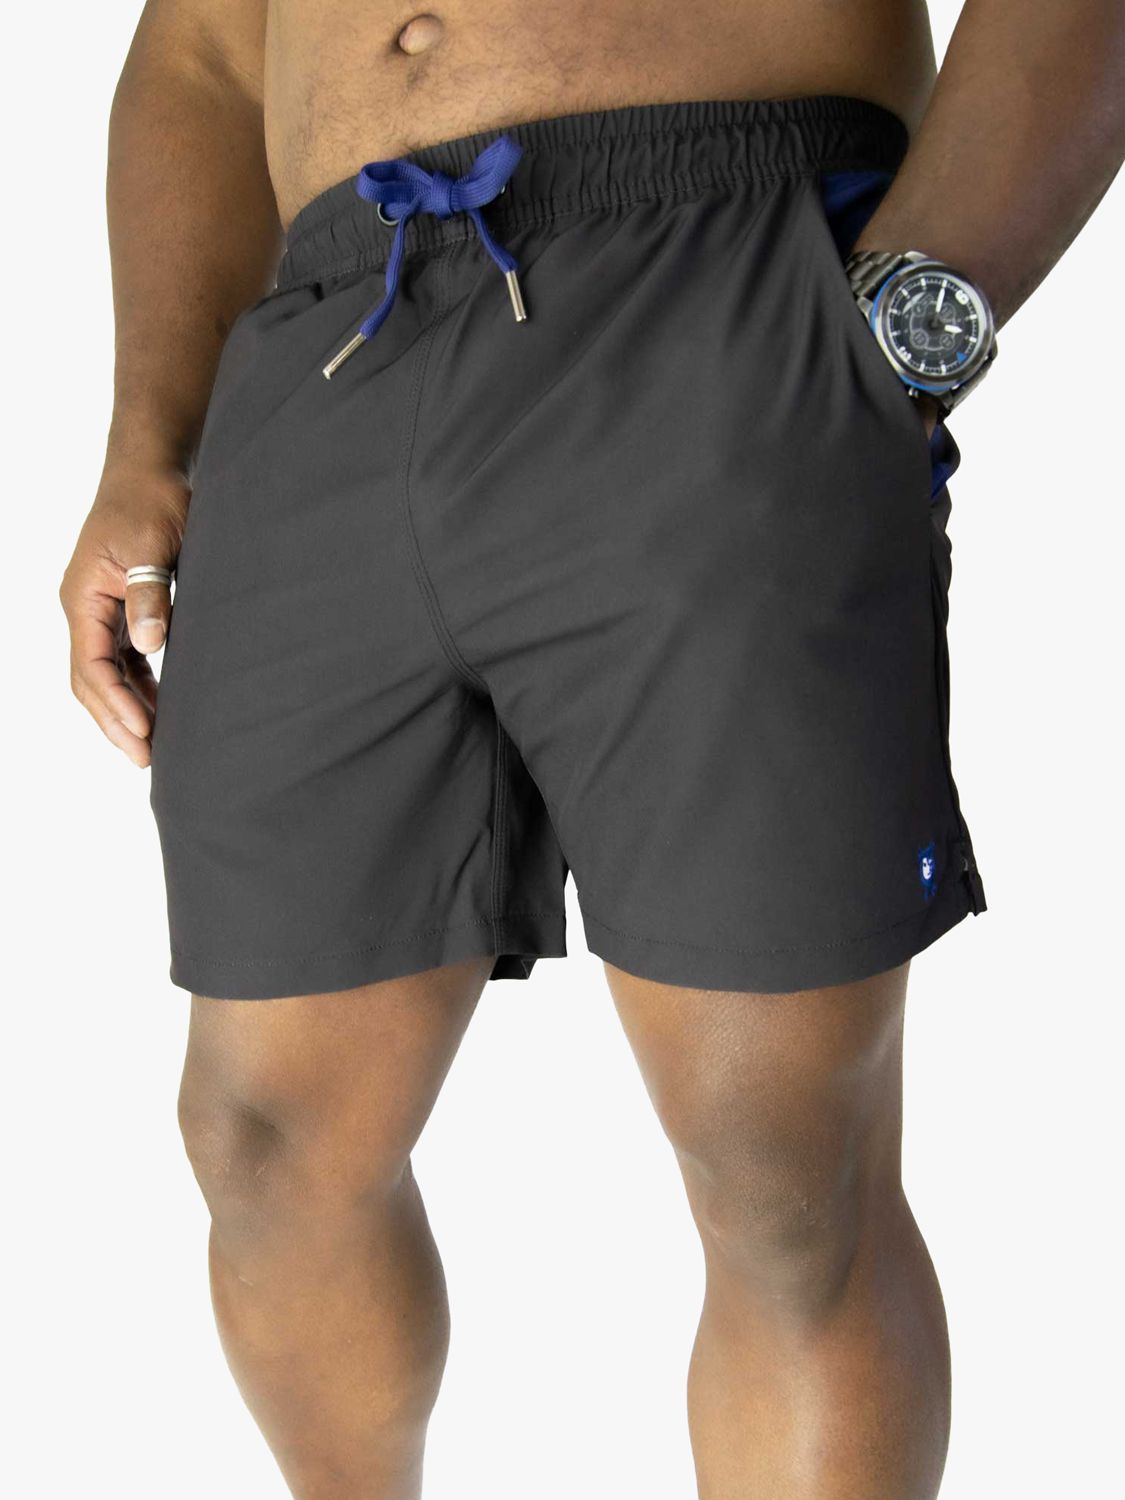 Buy Randy Cow Swim Shorts with Waterproof Pocket, Charcoal Online at johnlewis.com